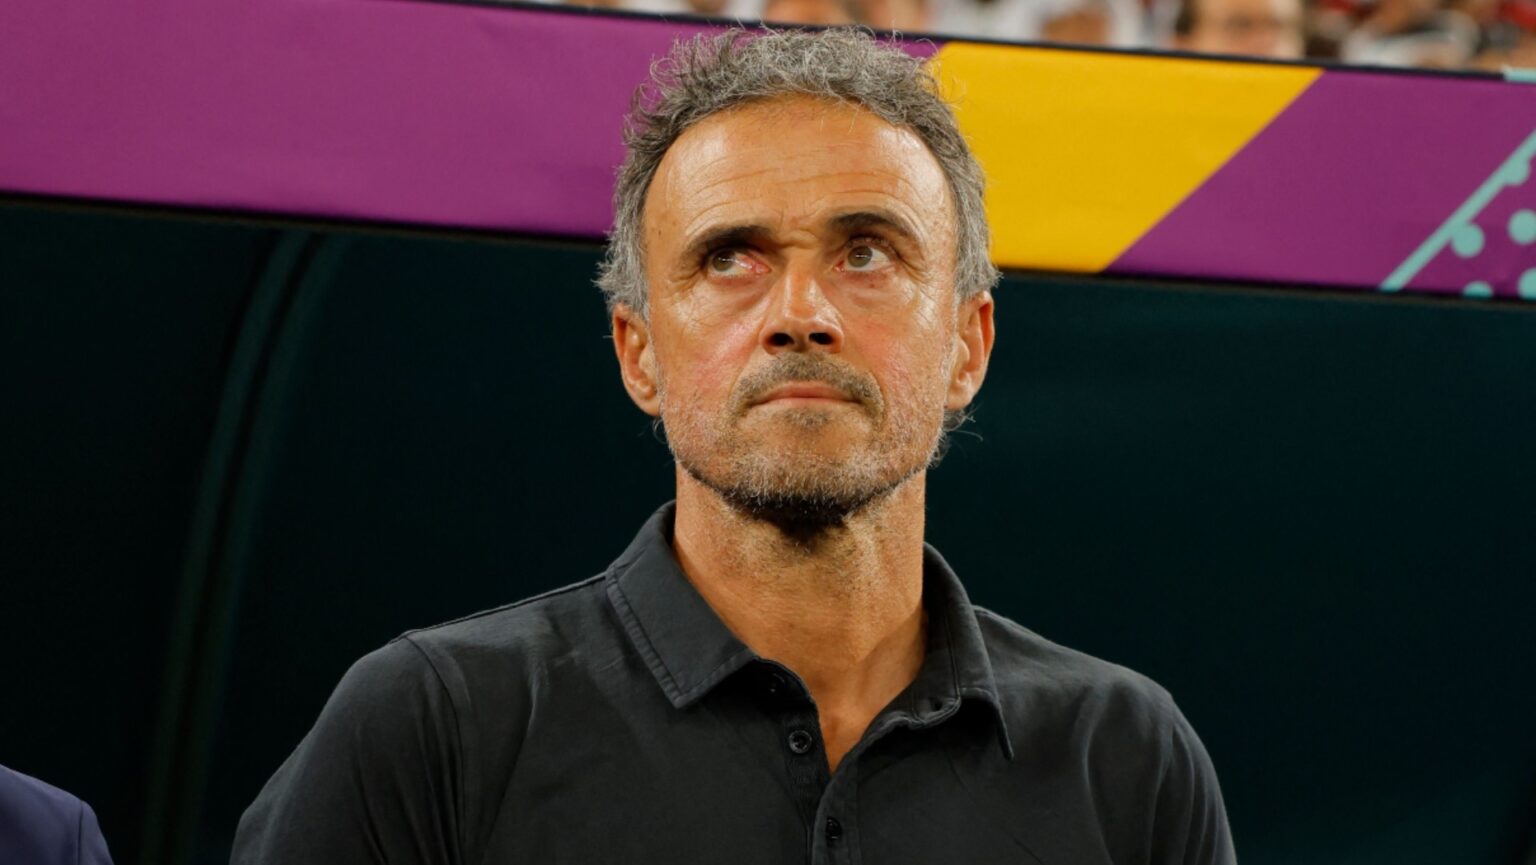 Luis Enrique sacked after Spain knocked out of World Cup 